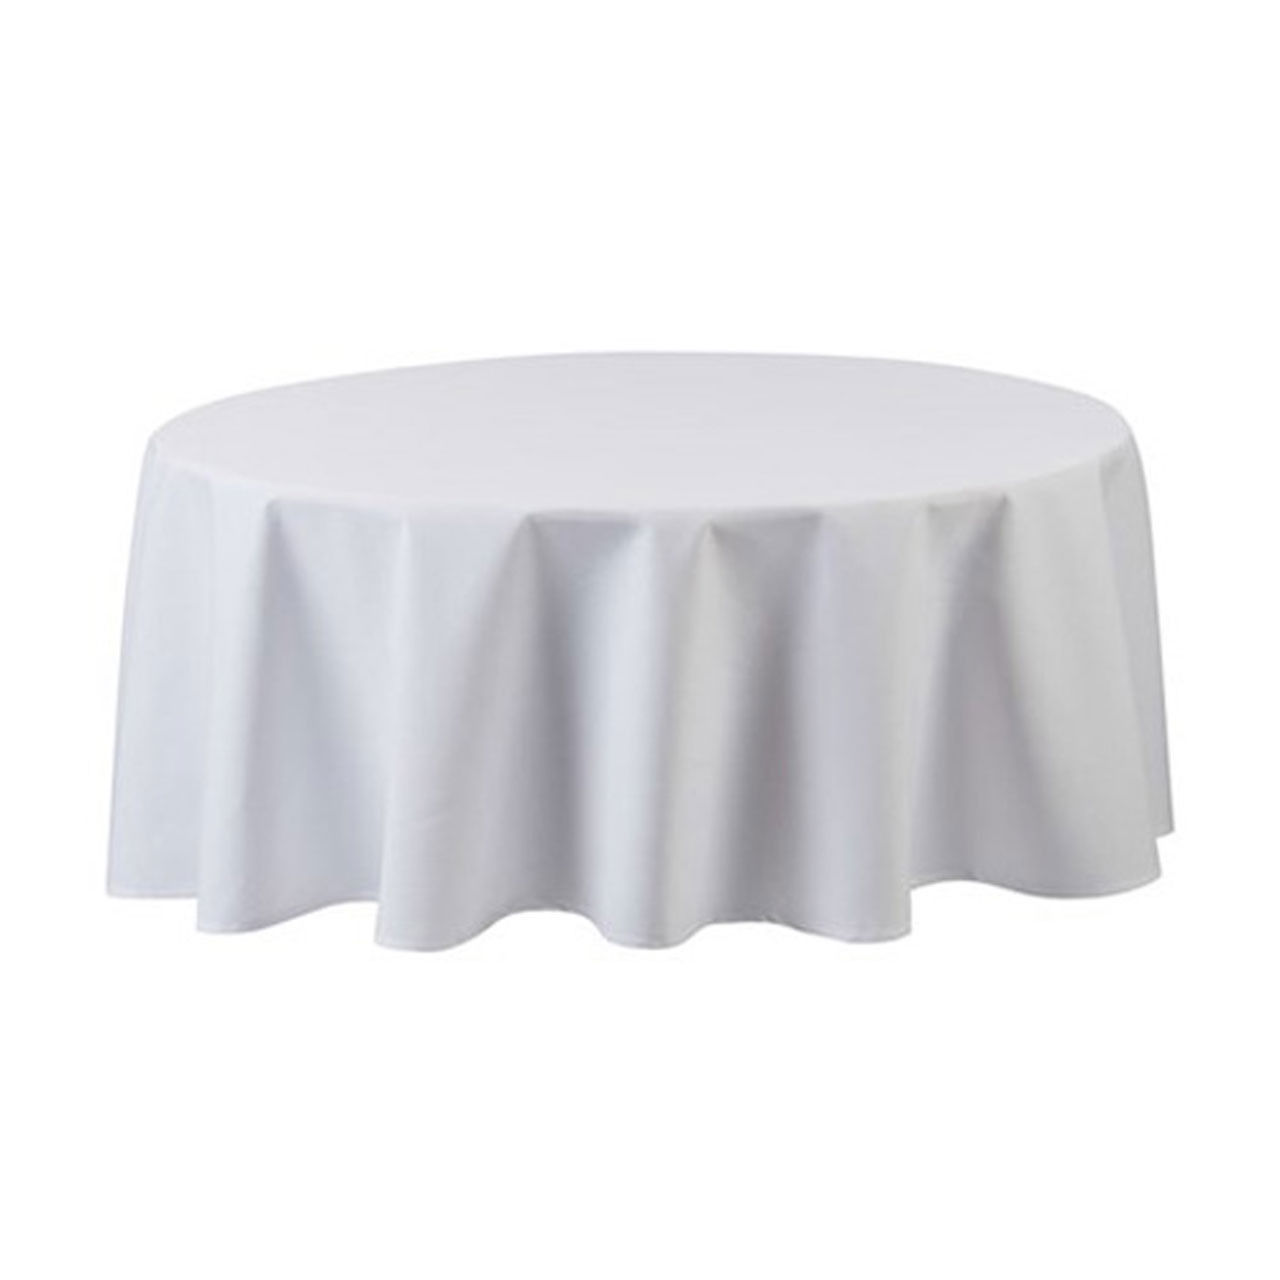 What advantages does the finish of the 120 round tablecloth offer?